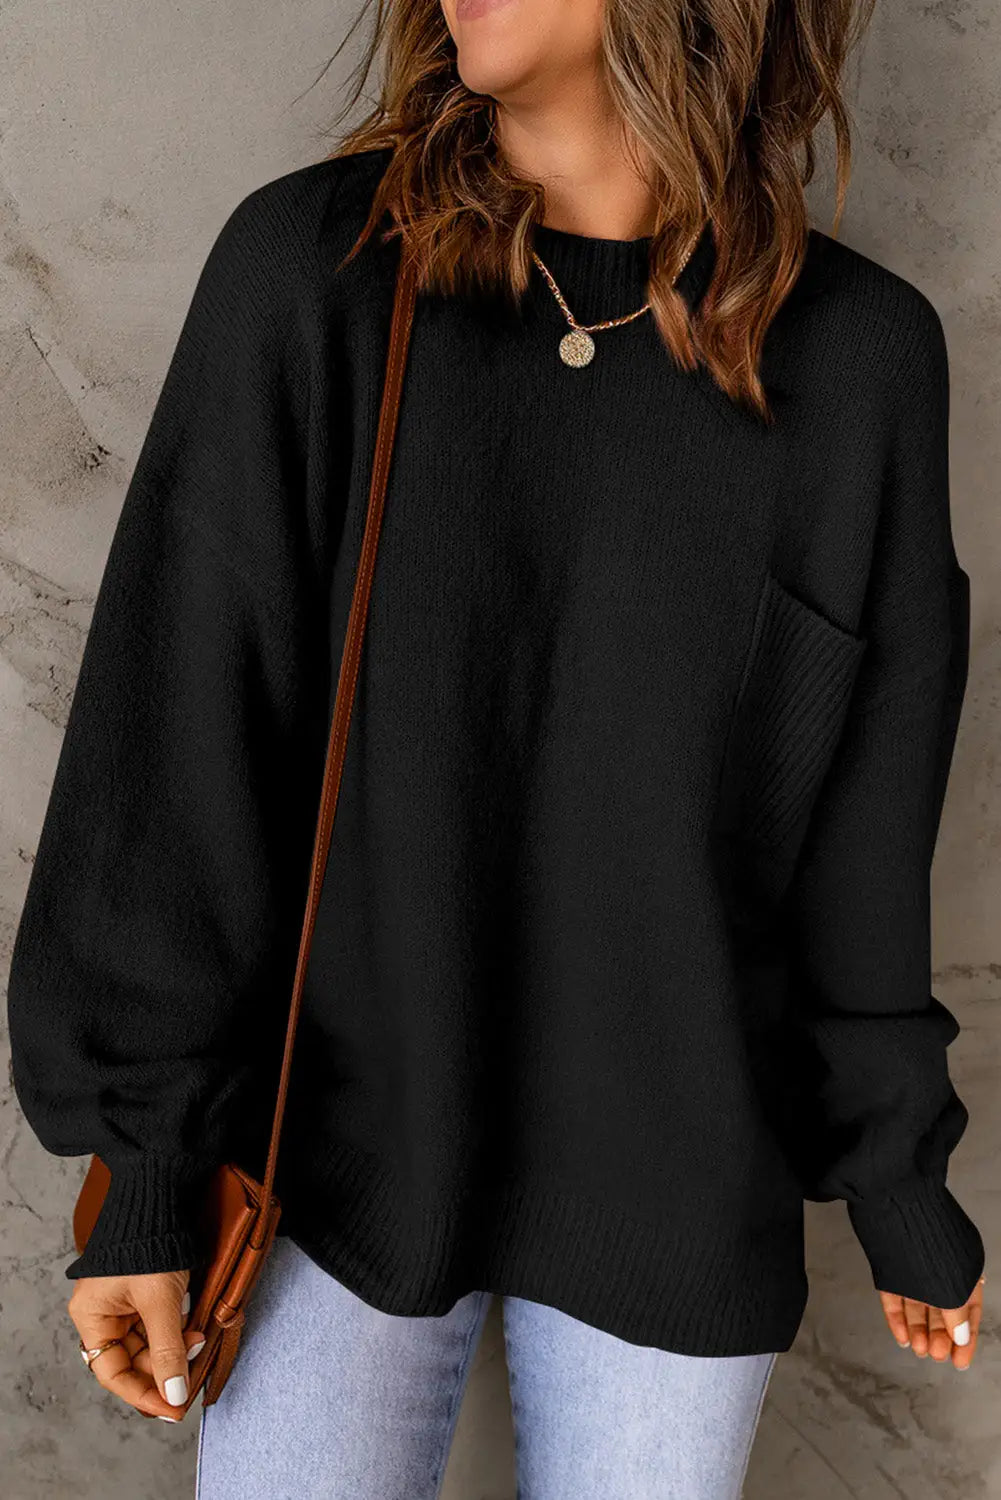 Black solid color puffy sleeve pocketed sweater - tops